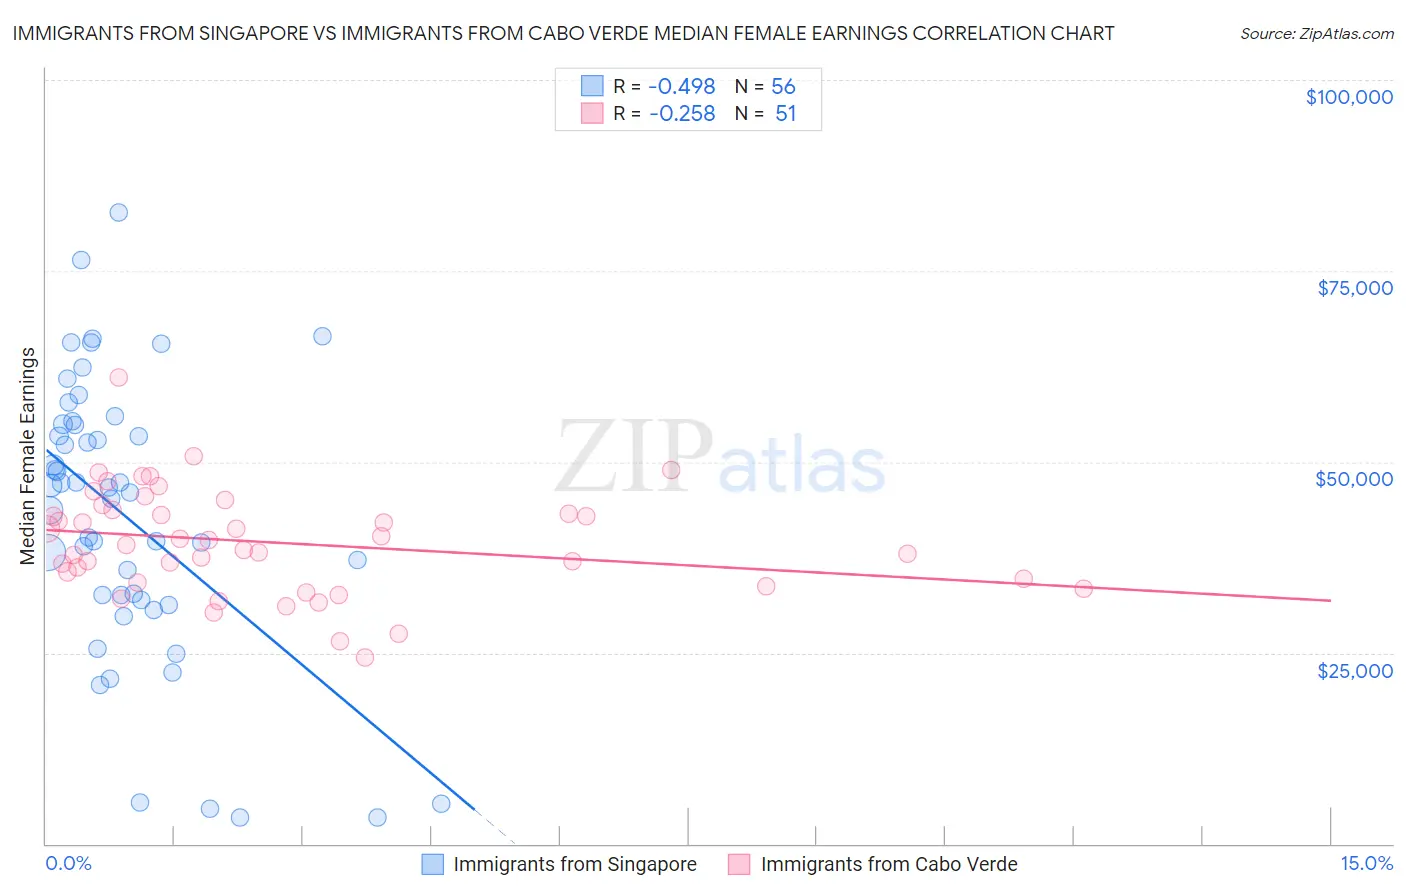 Immigrants from Singapore vs Immigrants from Cabo Verde Median Female Earnings